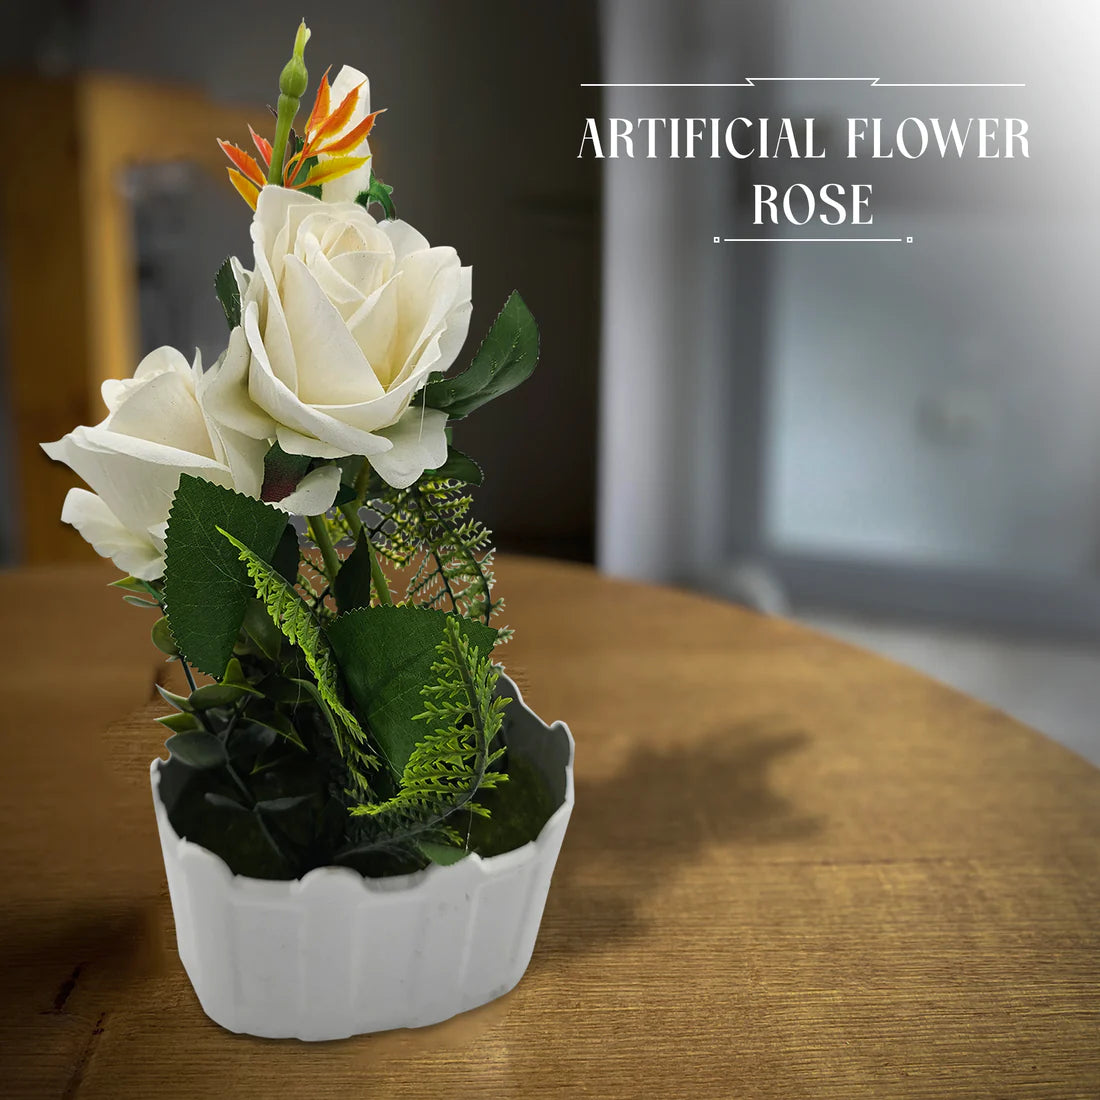 Rose artificial flowers